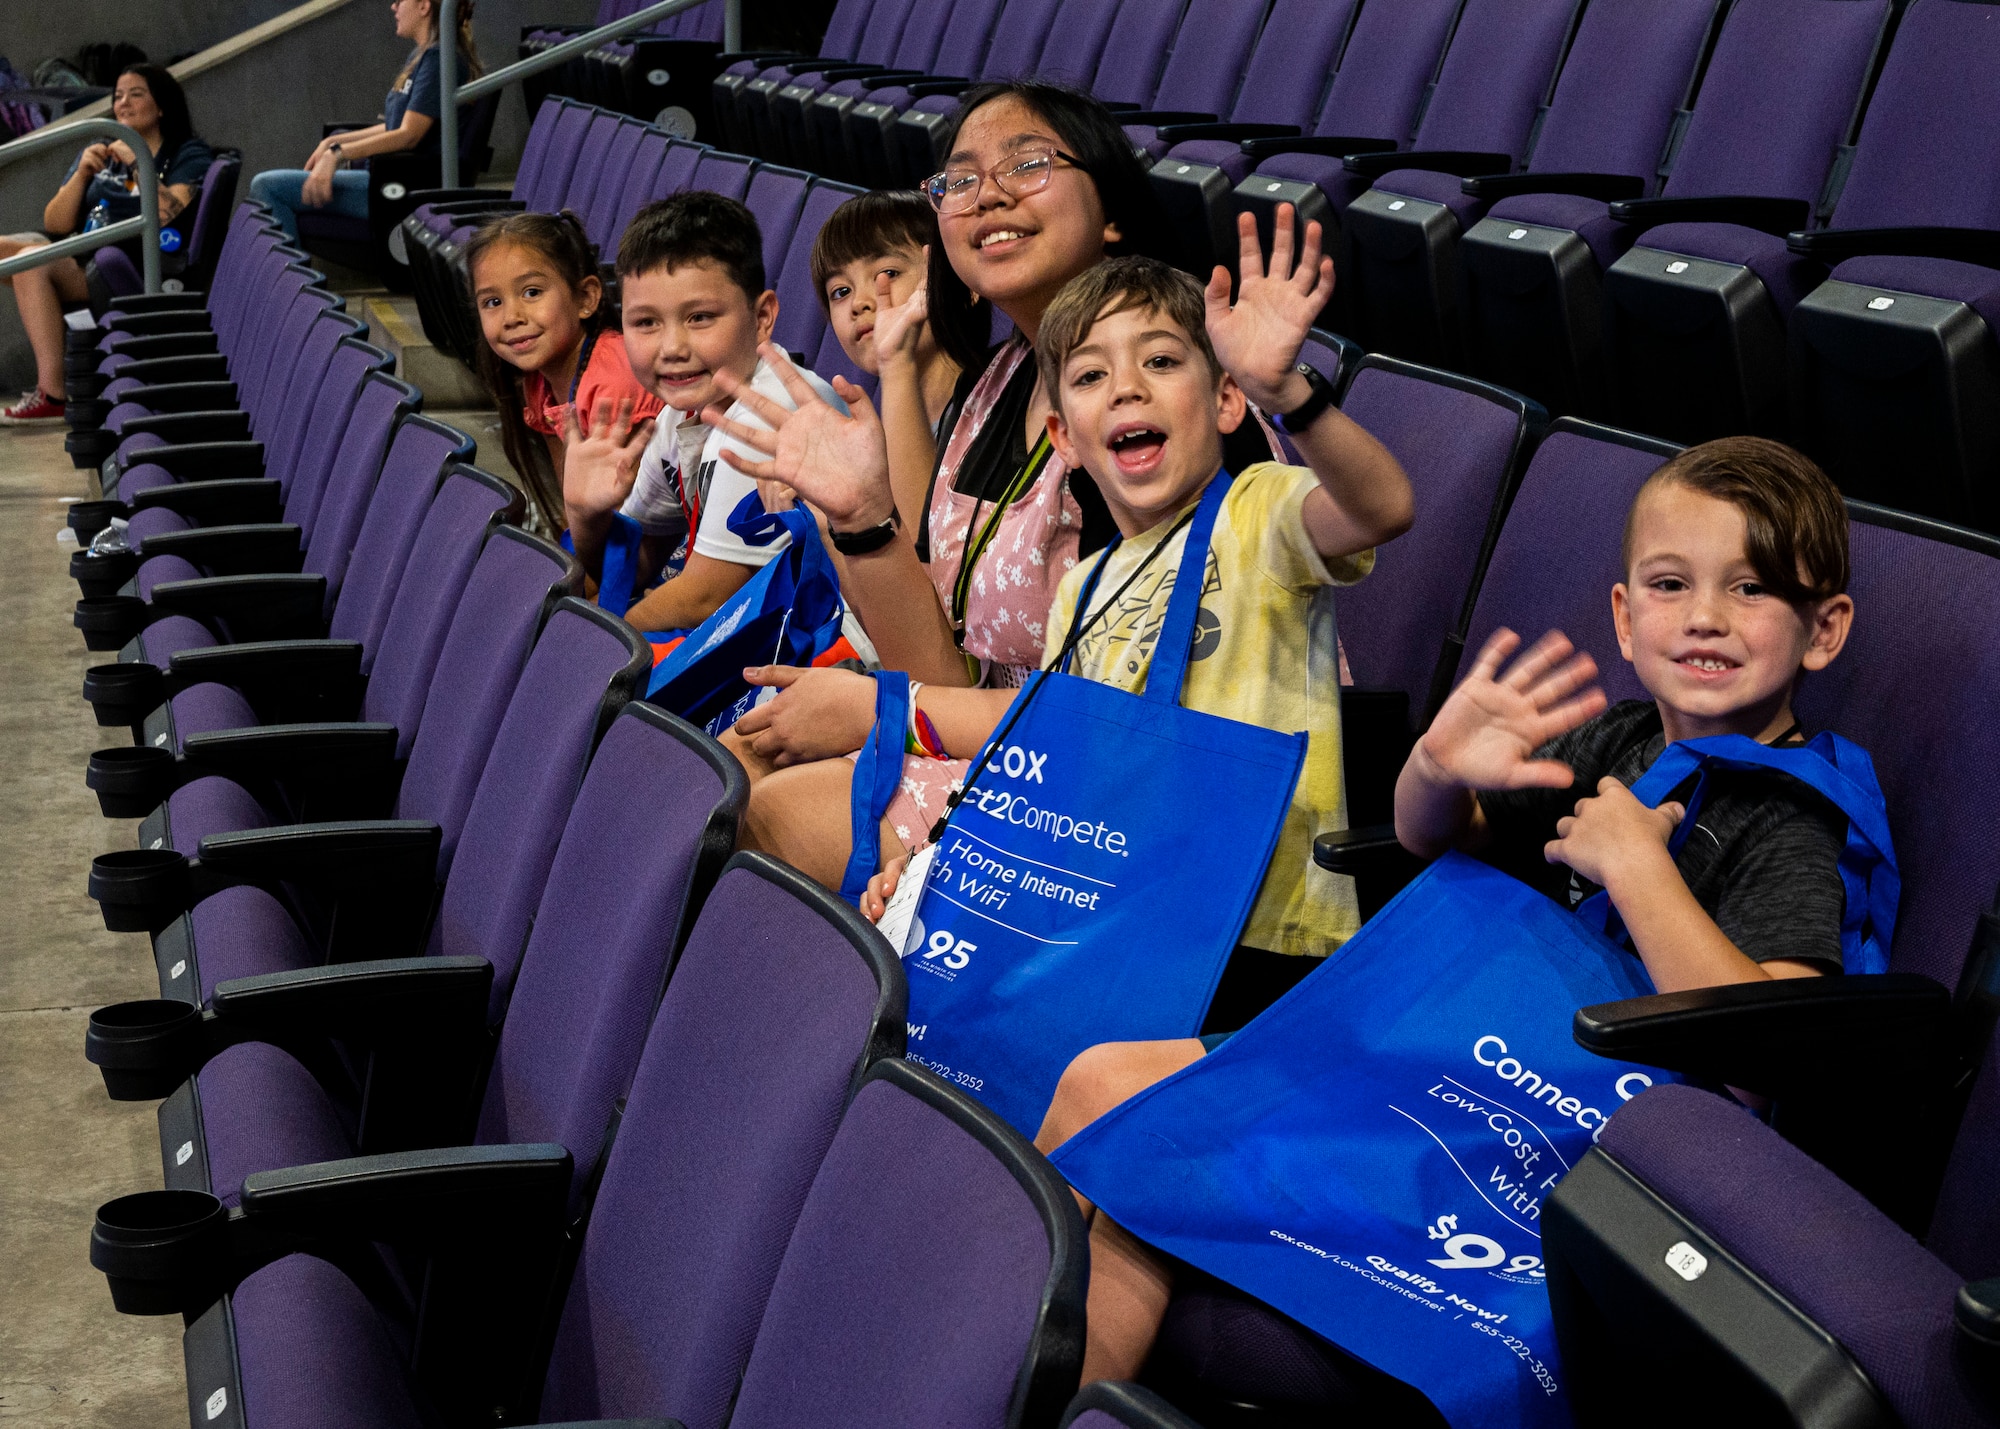 Children from both civilian and military families wait for school supplies at the Back to School Bash event July 20, 2022, at Grand Canyon University, Phoenix, Arizona.